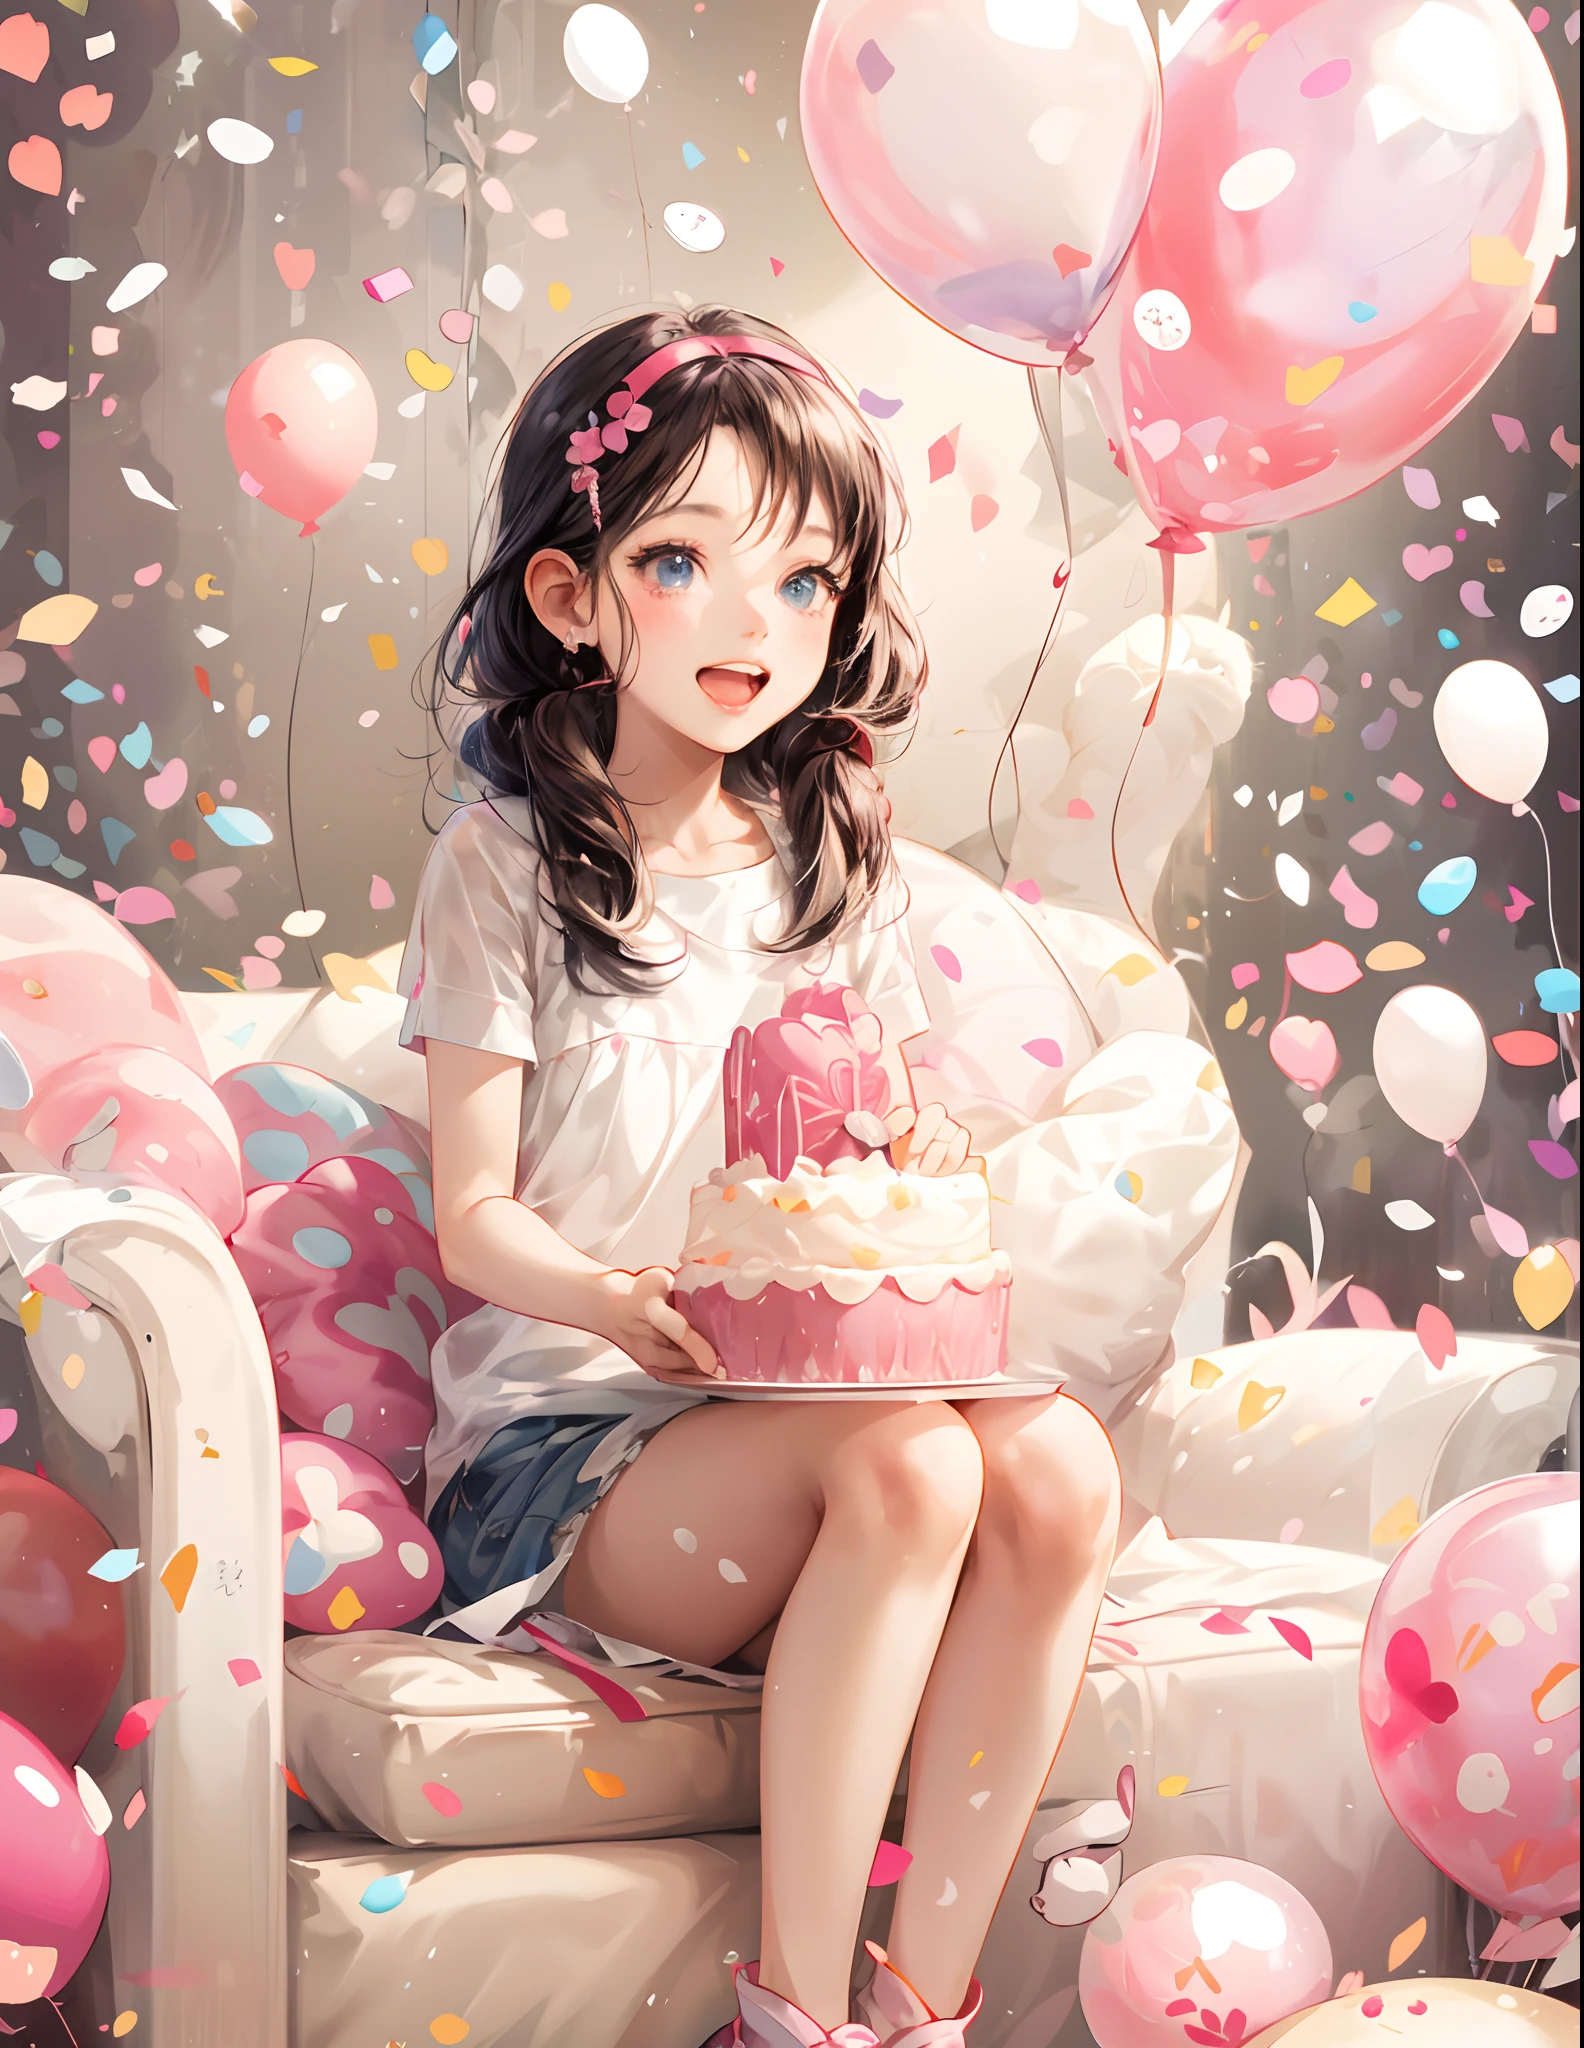 anime girl with balloons and confetti in the air, anime visual of a cute girl, young anime girl, beautiful anime art style, anime vibes, nightcore, clean detailed anime art, cute anime girl, beautiful anime portrait, high quality anime artstyle, beautiful anime art, beautiful anime artwork, (anime girl), cute anime girl portraits, kawacy, anime asthetic